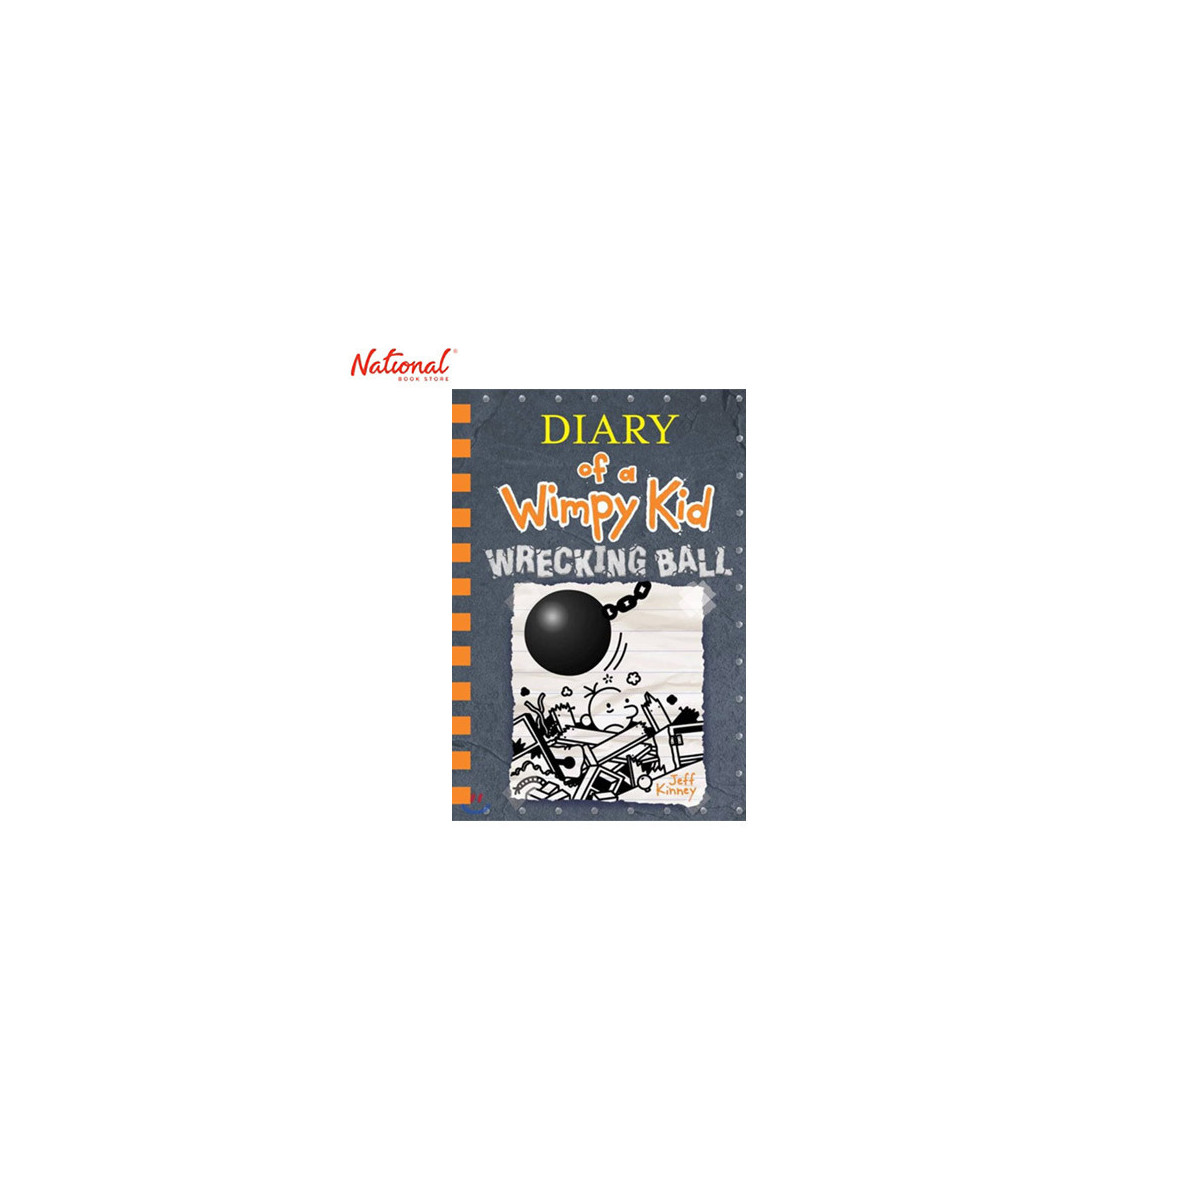 DIARY OF A WIMPY KID 14: WRECKING BALL EXCLUSIVE SPECIAL EDITION HARDCOVER